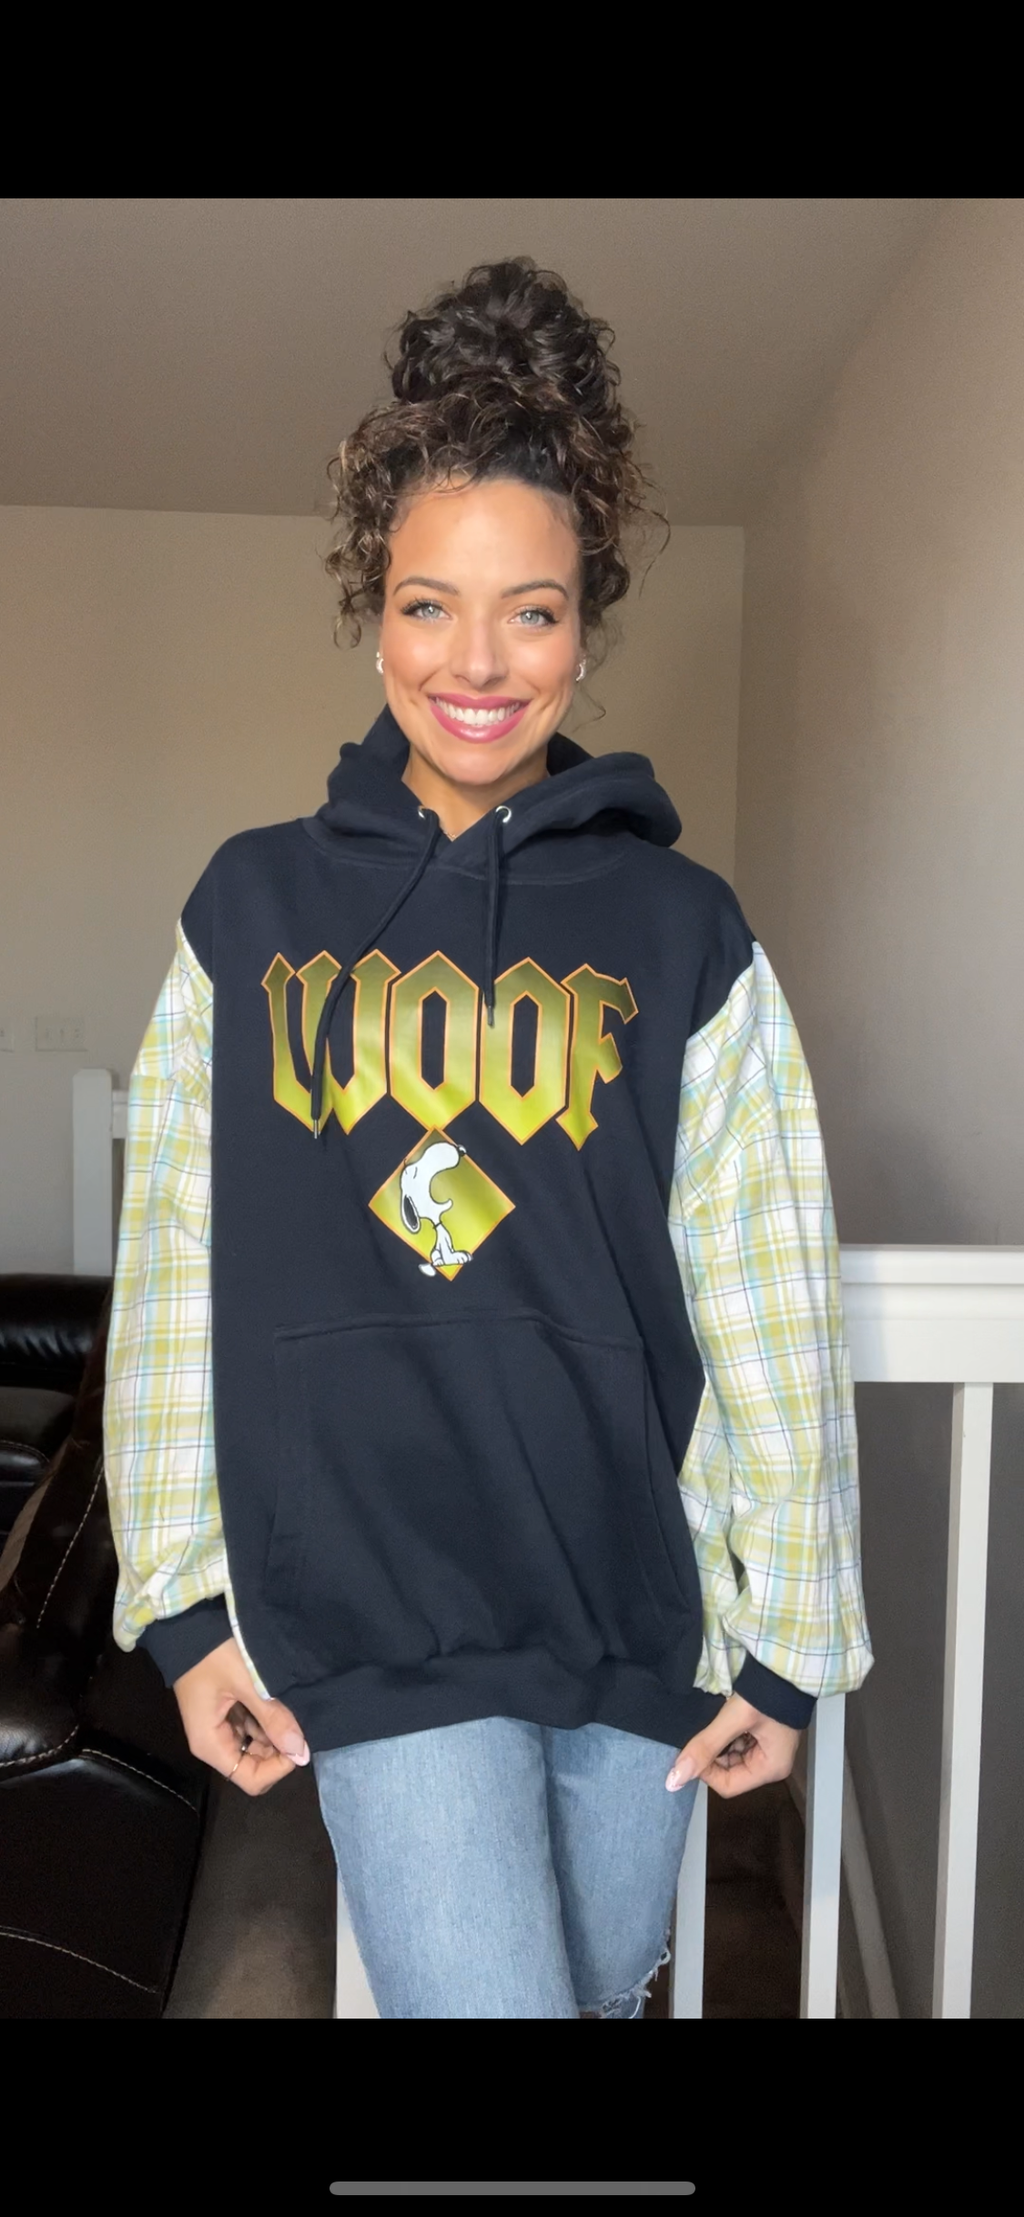 Upcycled ￼Woof - Women’s 3X – soft thick sweatshirt with cotton sleeves￼